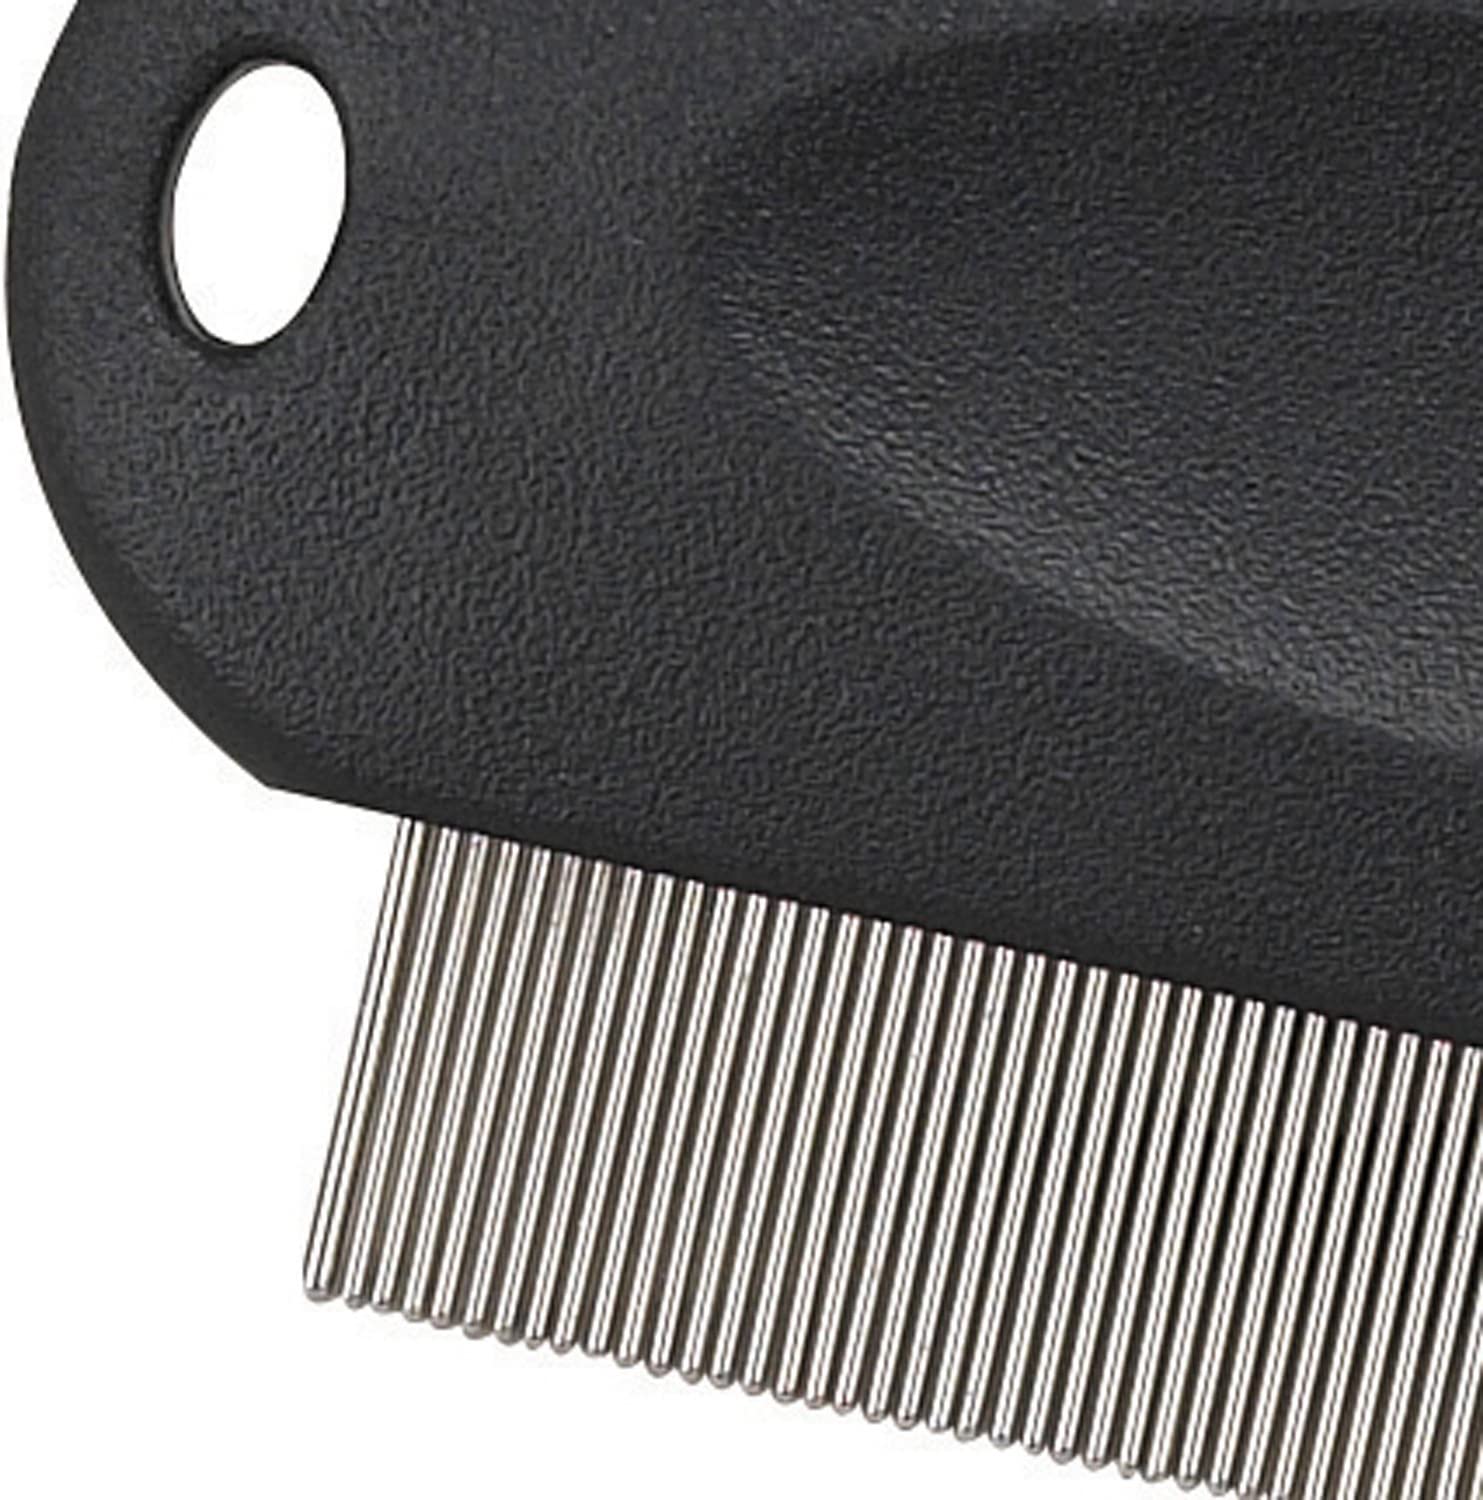 Master Grooming Tools Contoured Grip Flea Combs — Ergonomic Combs for Removing Fleas, Black, 3-inch